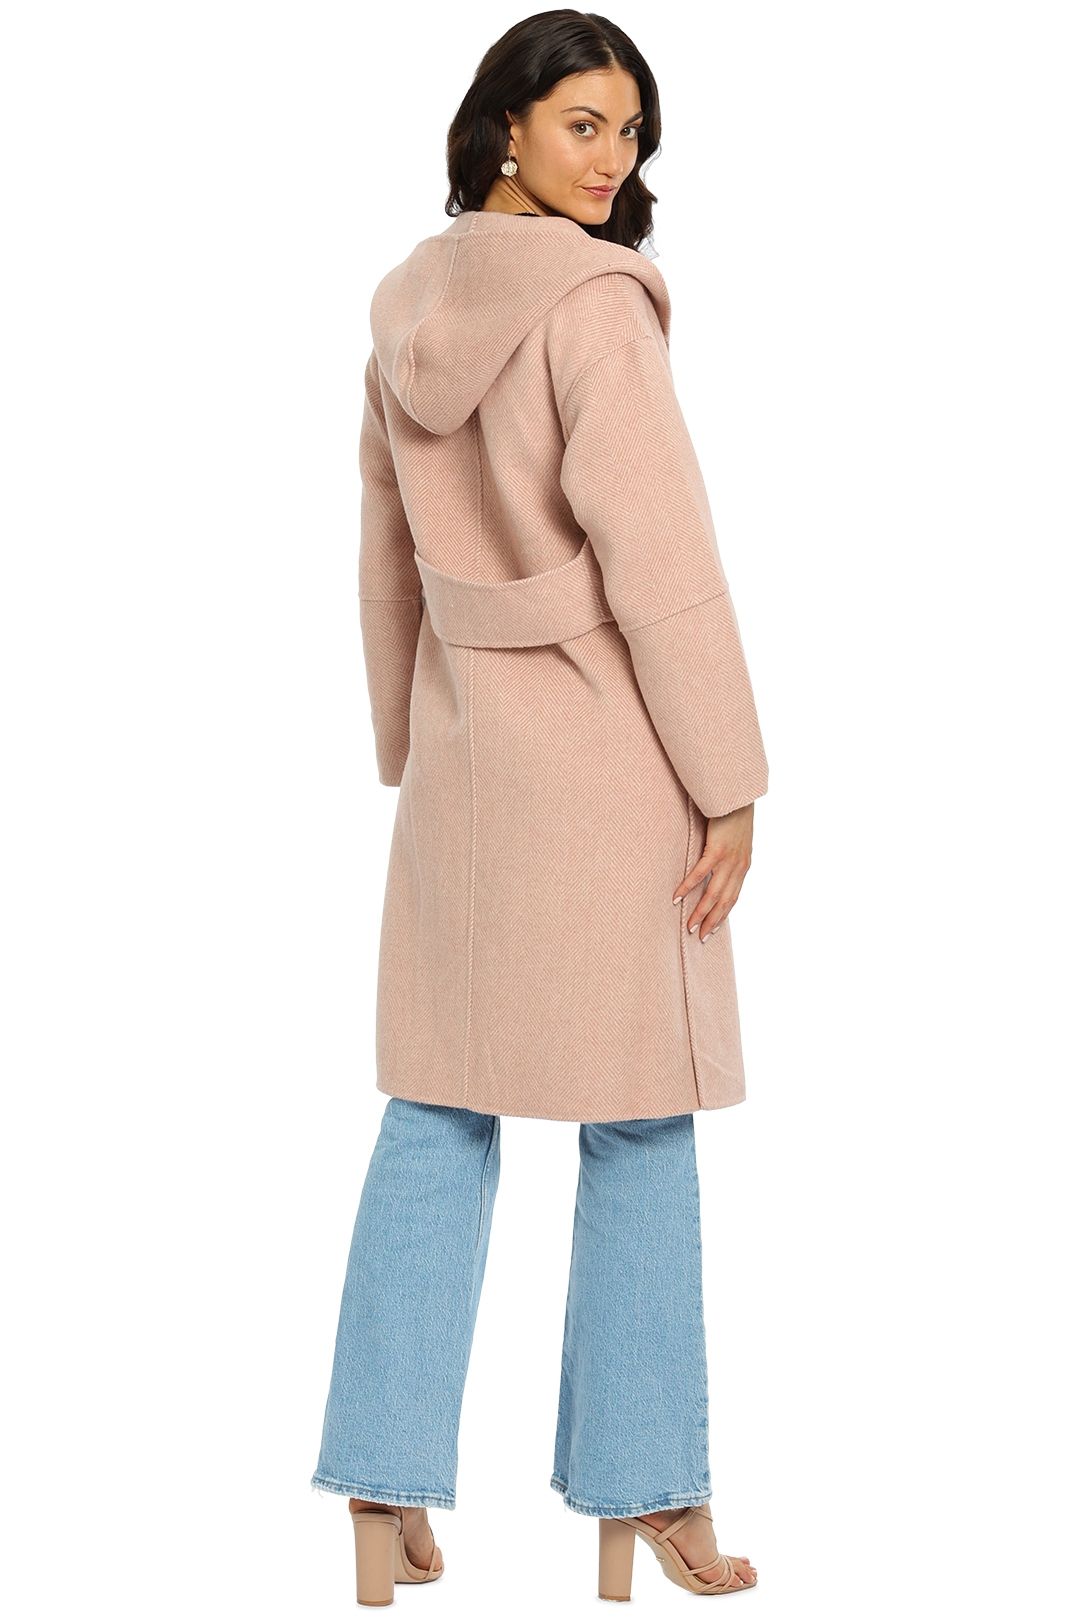 Belle and Bloom Walk This Way Coat Pink Long Sleeve